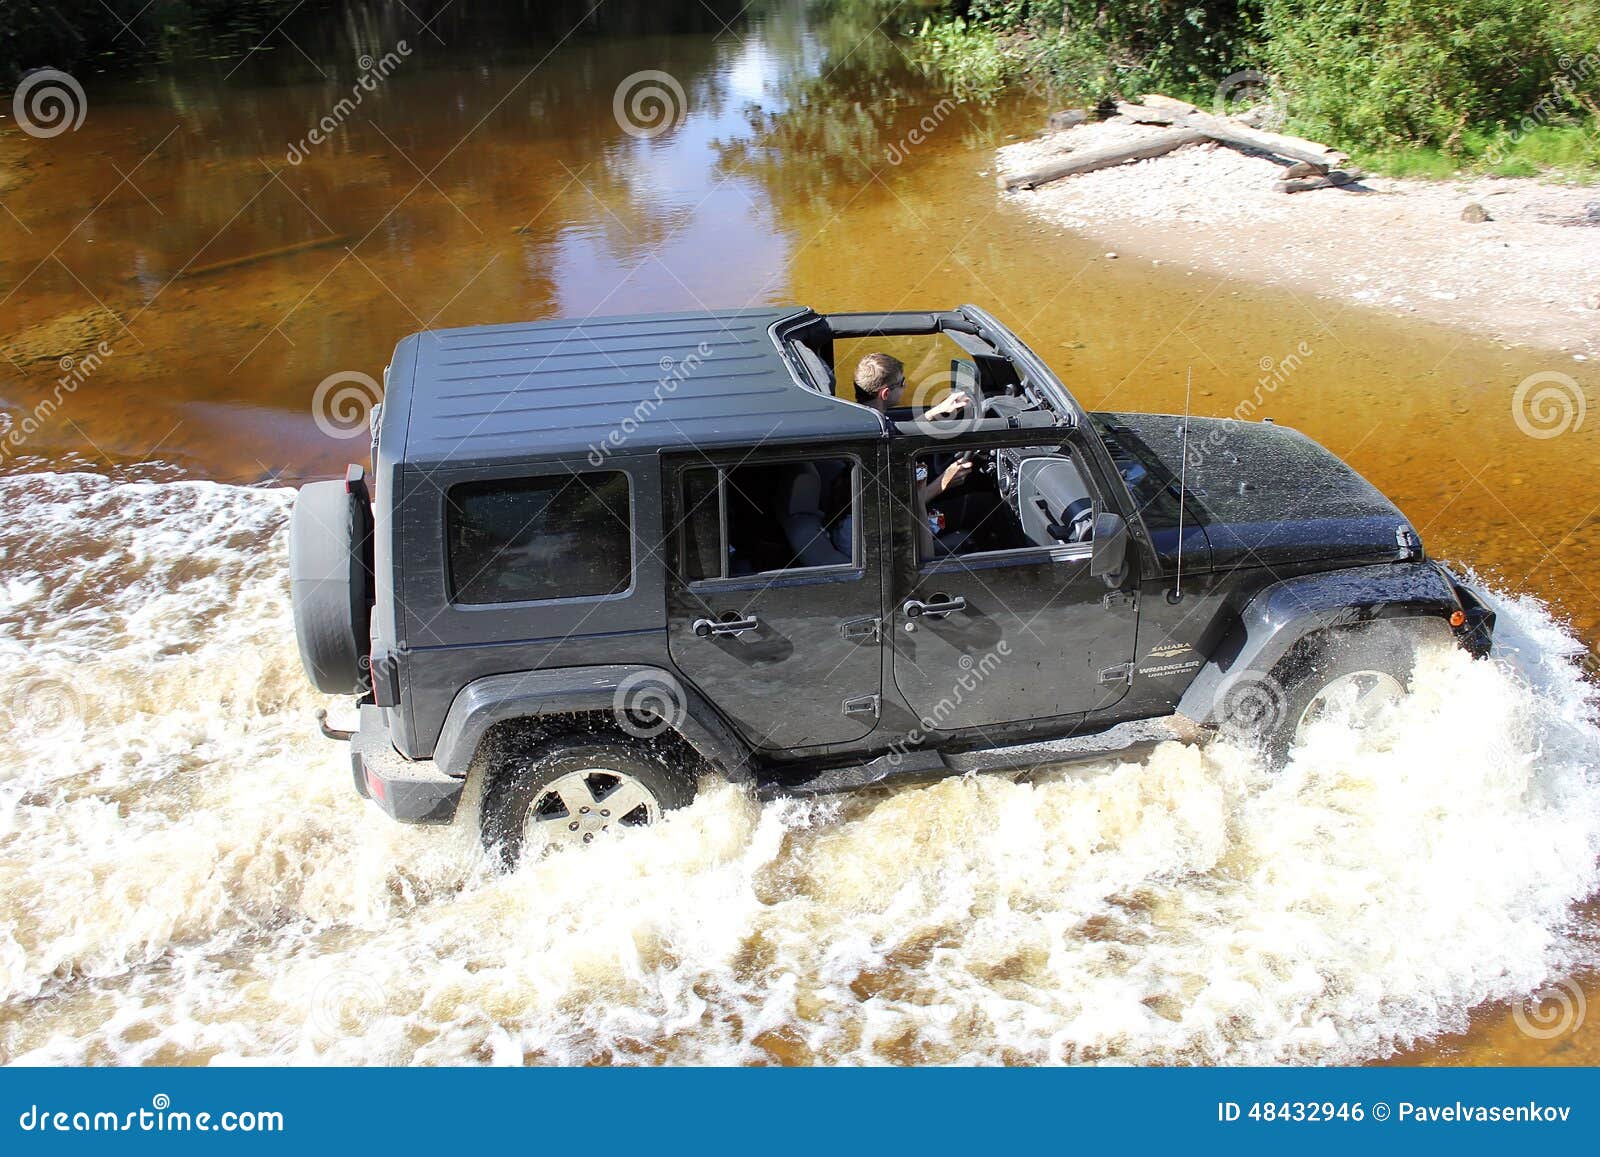 Jeep Wrangler in a Pine Forest Editorial Photo - Image of wrangler, jeep:  48432946